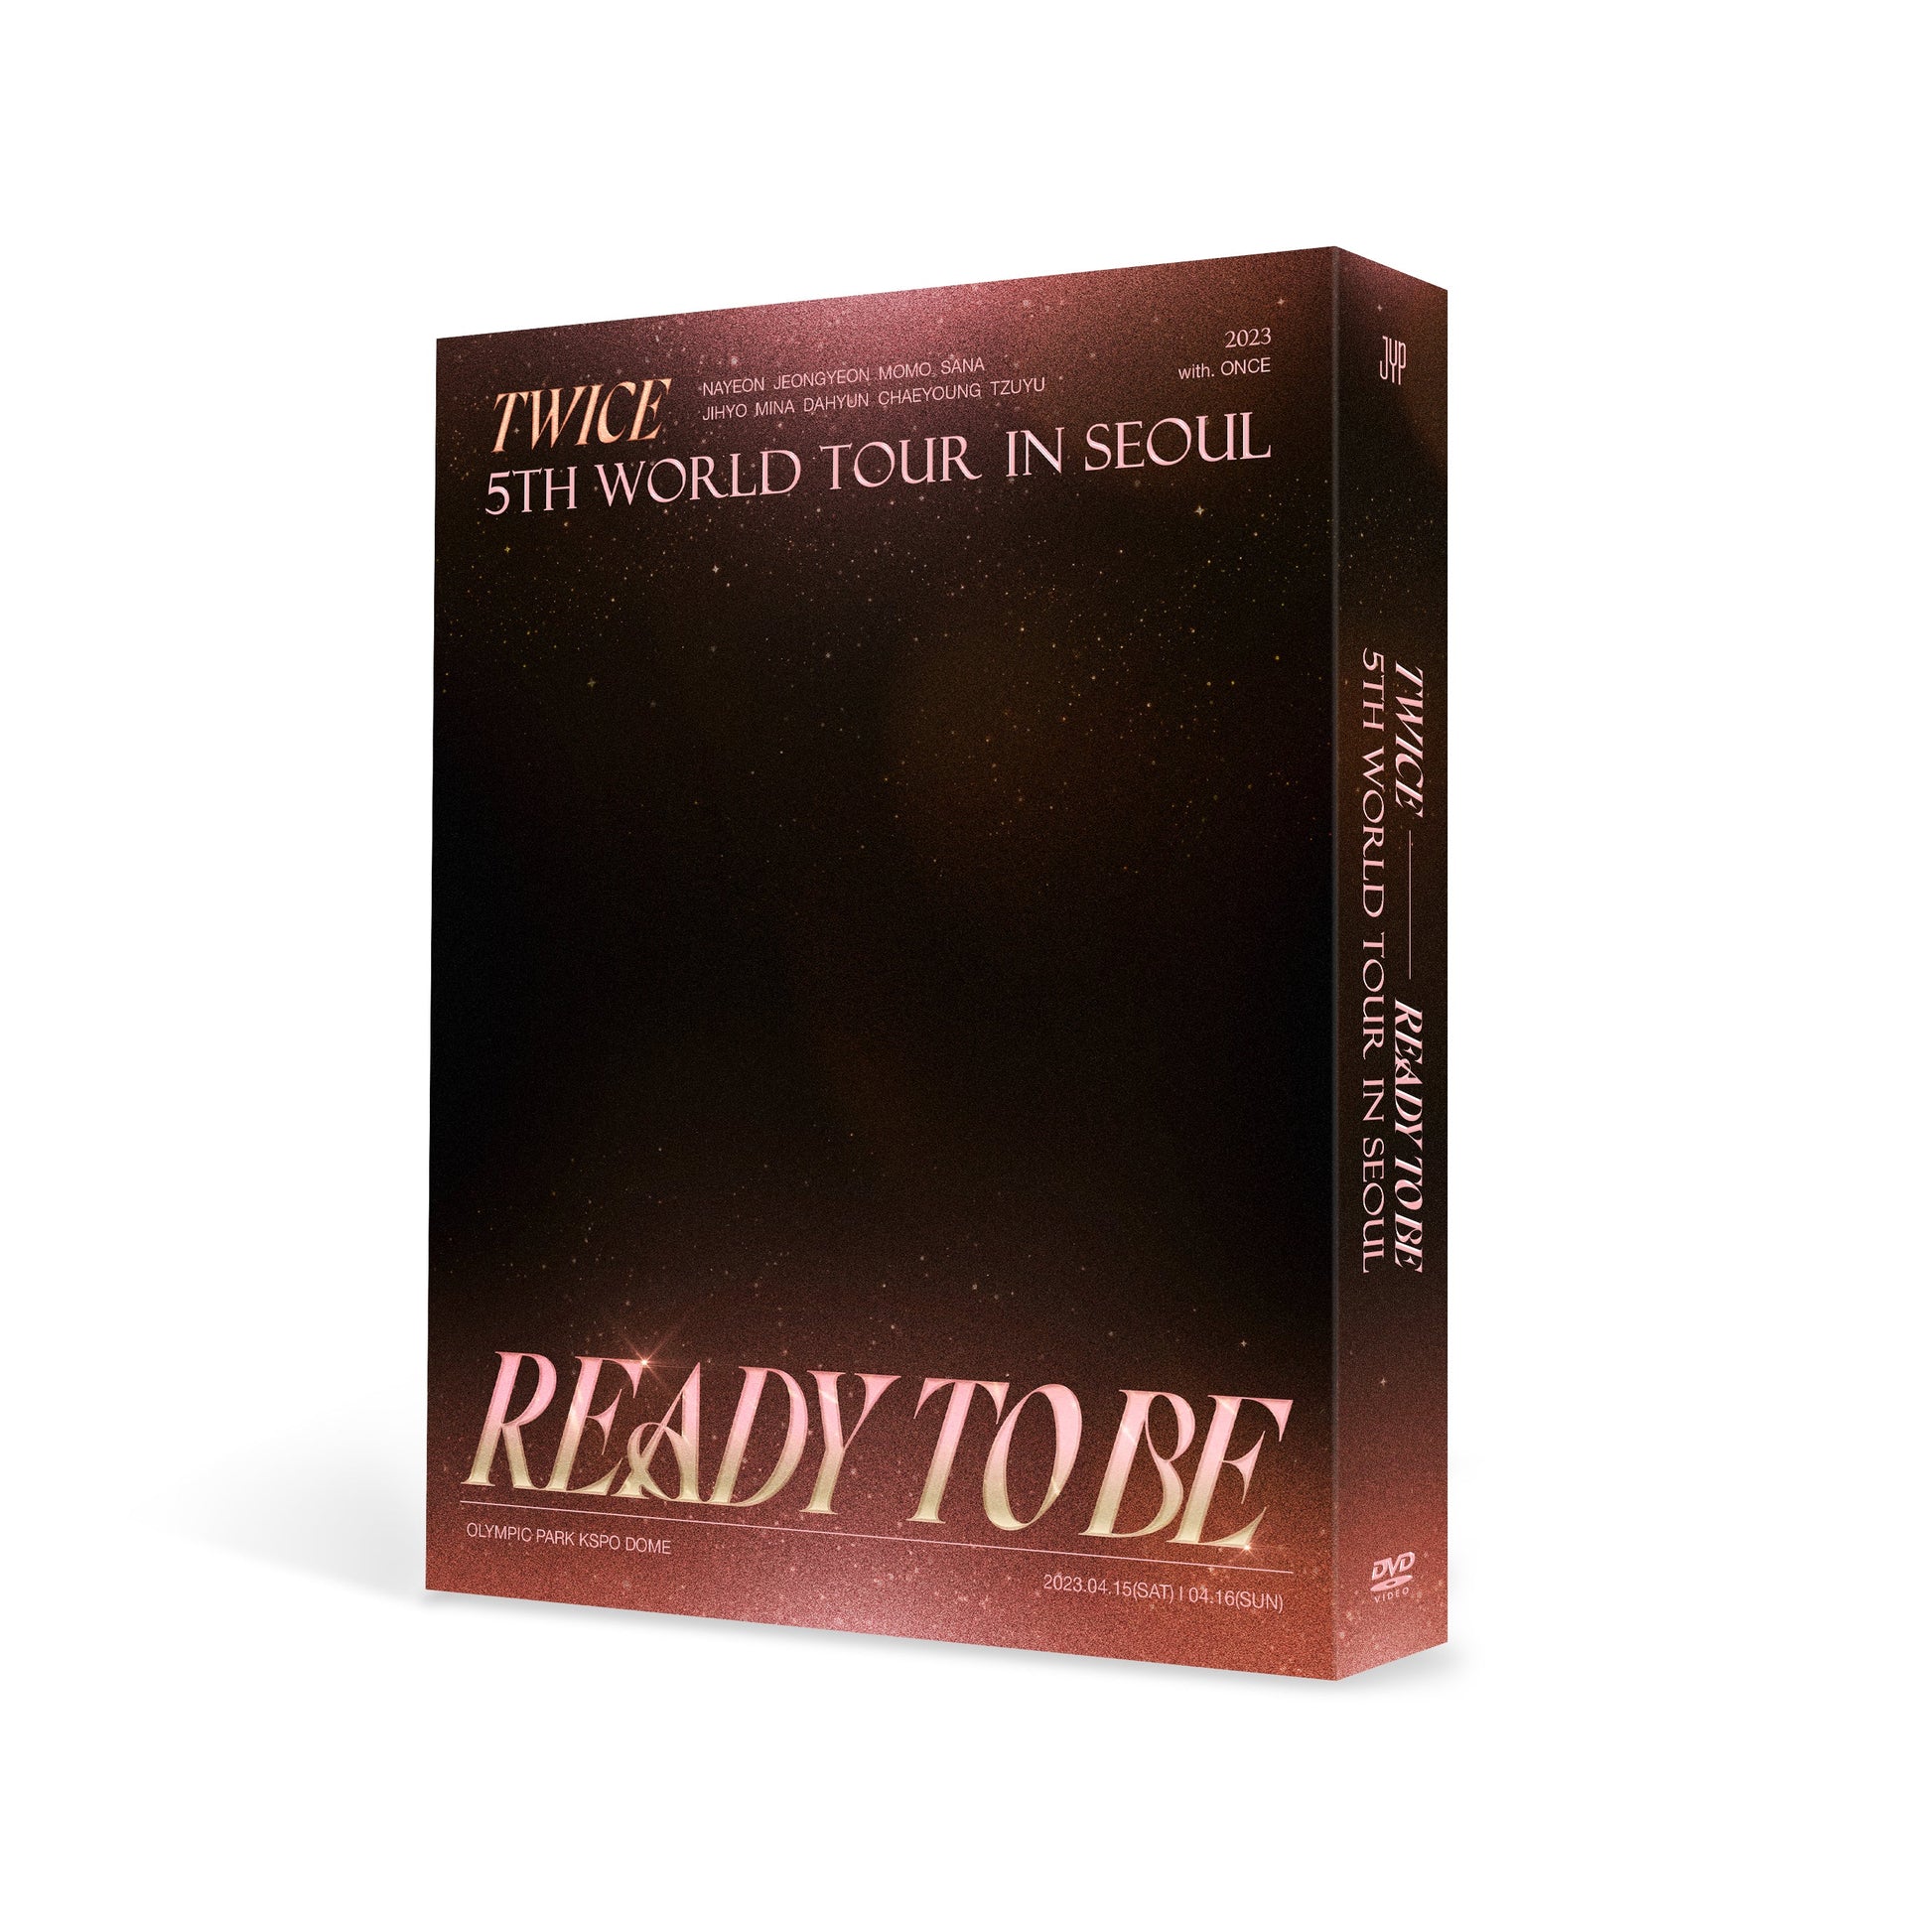 Twice - 5th World Tour [Ready to BE] in Seoul (dvd)